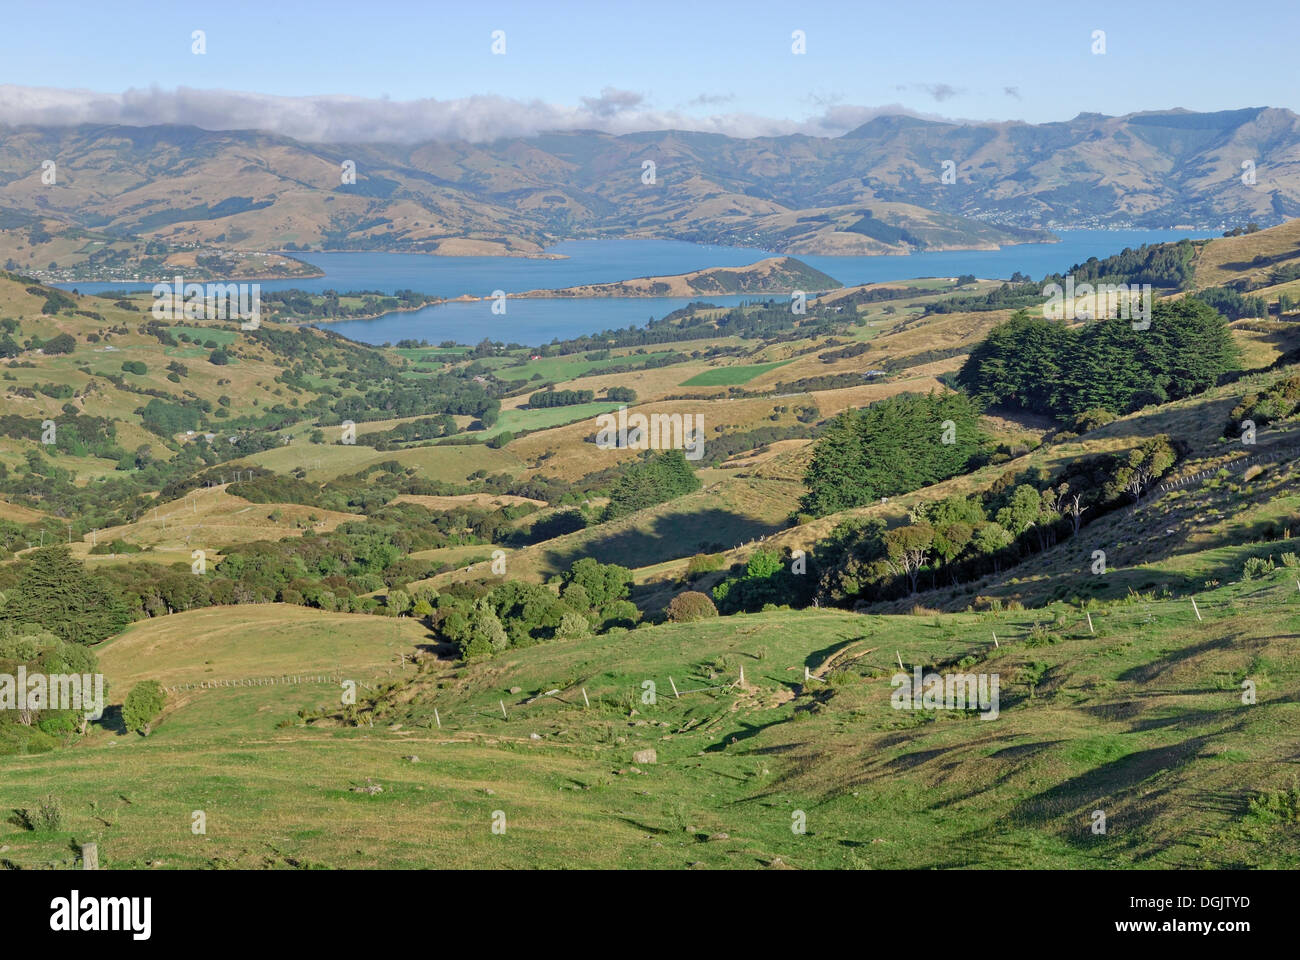 View of Akaroa Harbour from Hilltop, Banks Peninsula near Christchurch, South Island, New Zealand Stock Photo